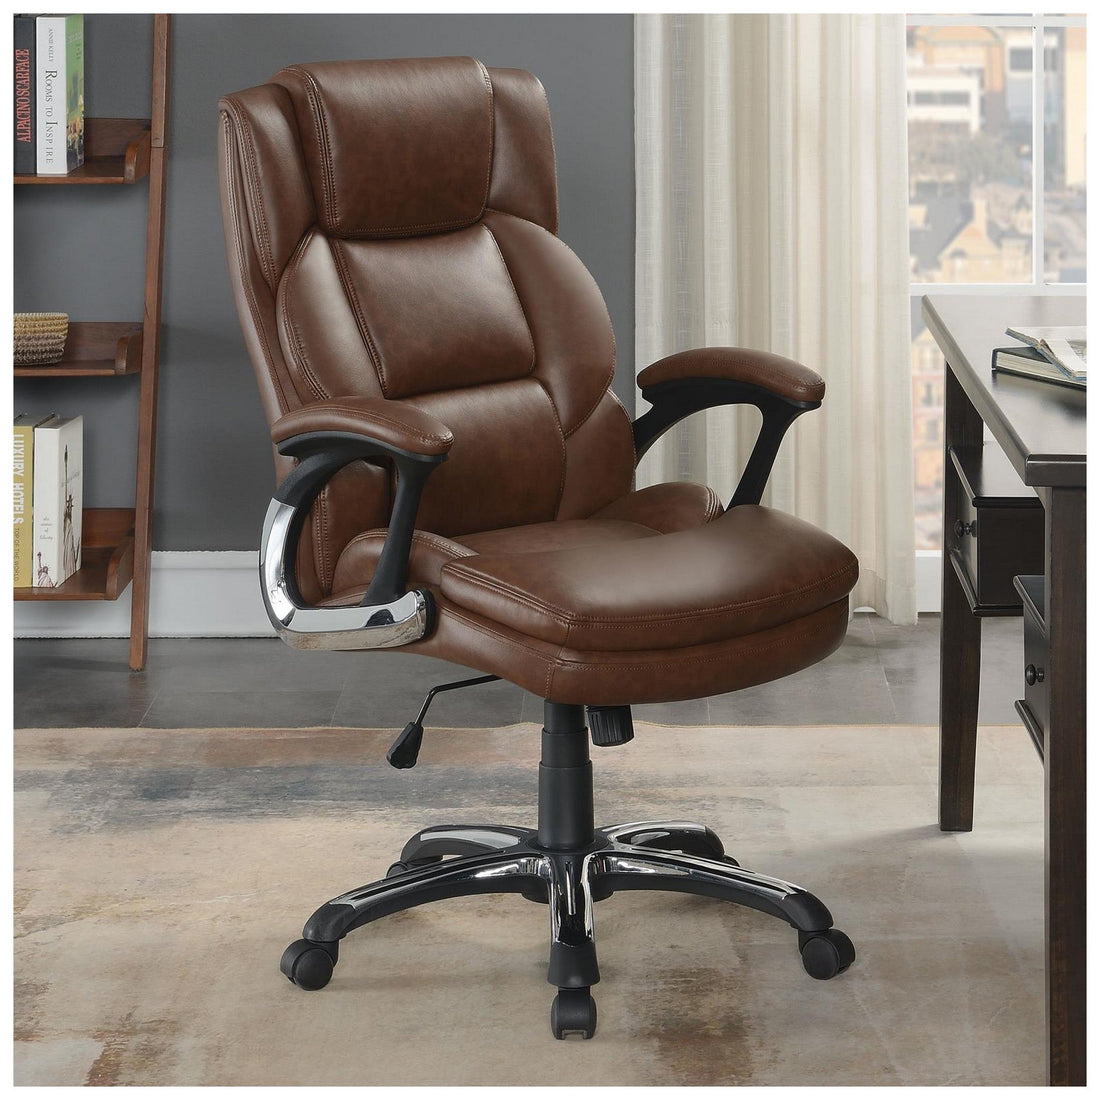 Nerris Adjustable Height Office Chair with Padded Arm Brown and Black 881184